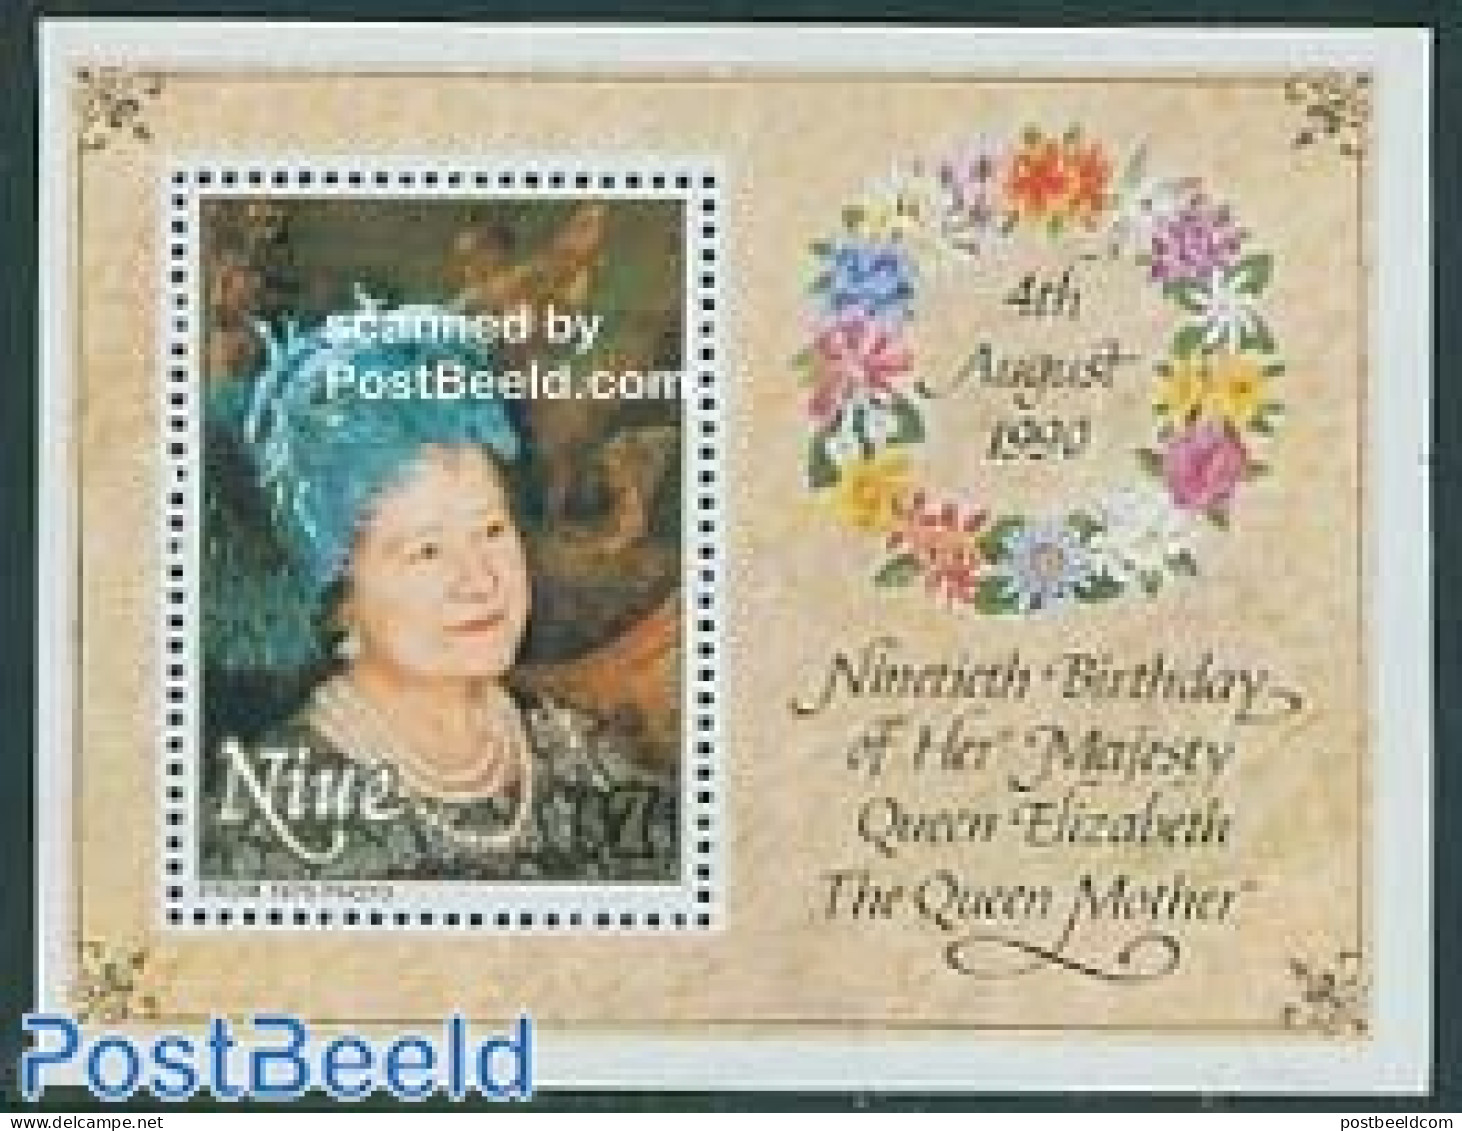 Niue 1990 Queen Mother S/s, Mint NH, History - Kings & Queens (Royalty) - Familias Reales